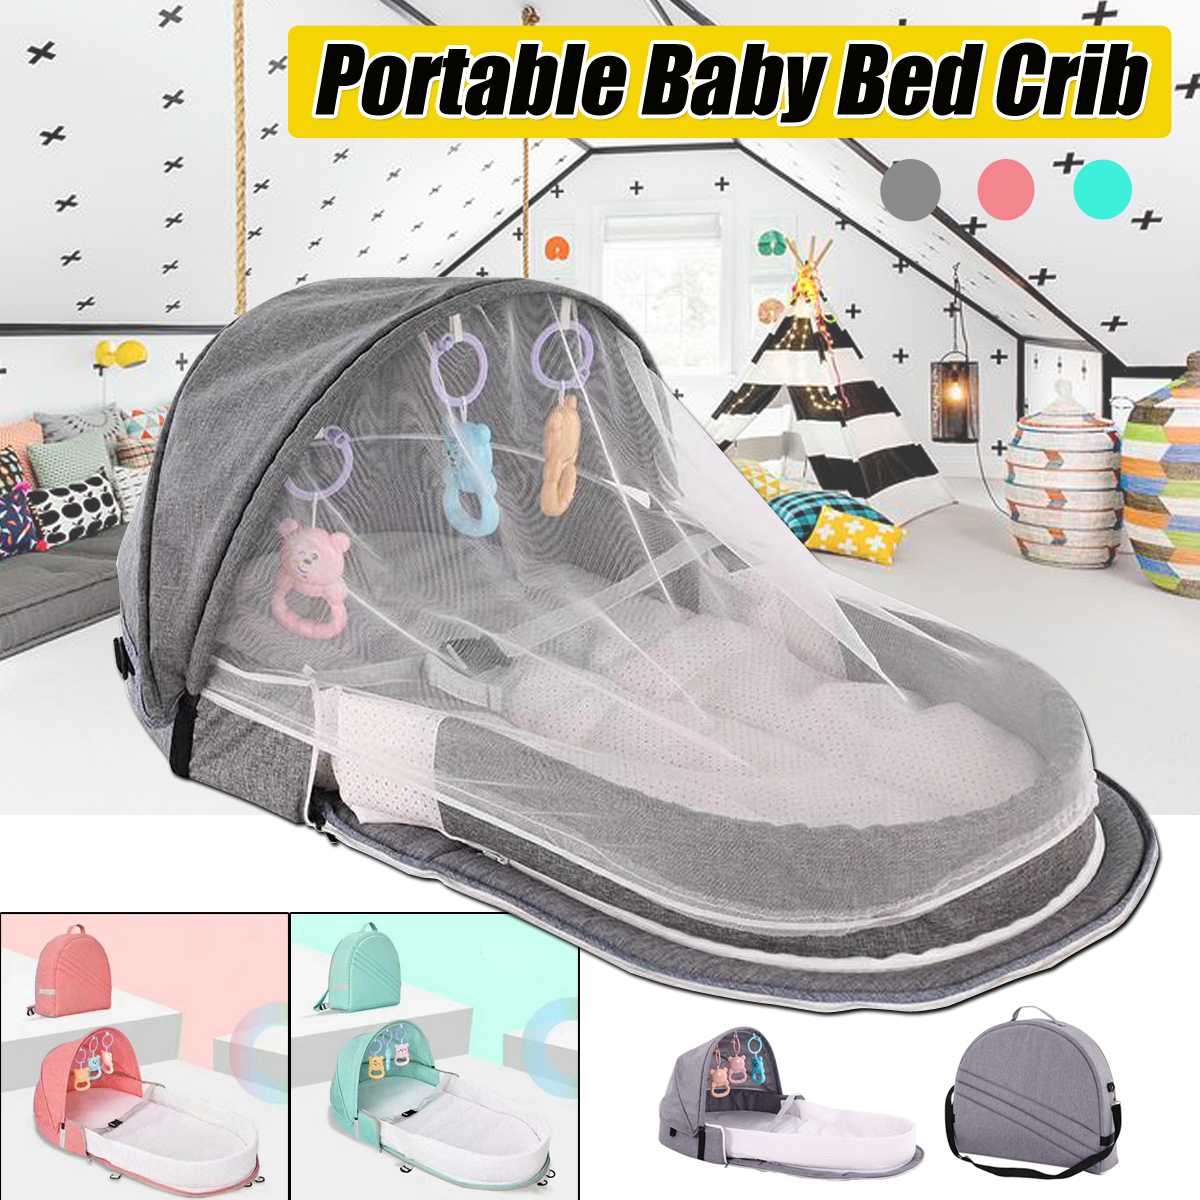 Portable Foldable Baby Bed Multi-function Mummy Bag Travel Baby Crib cot With Mosquito Net Breathable Infant Sleeping Basket